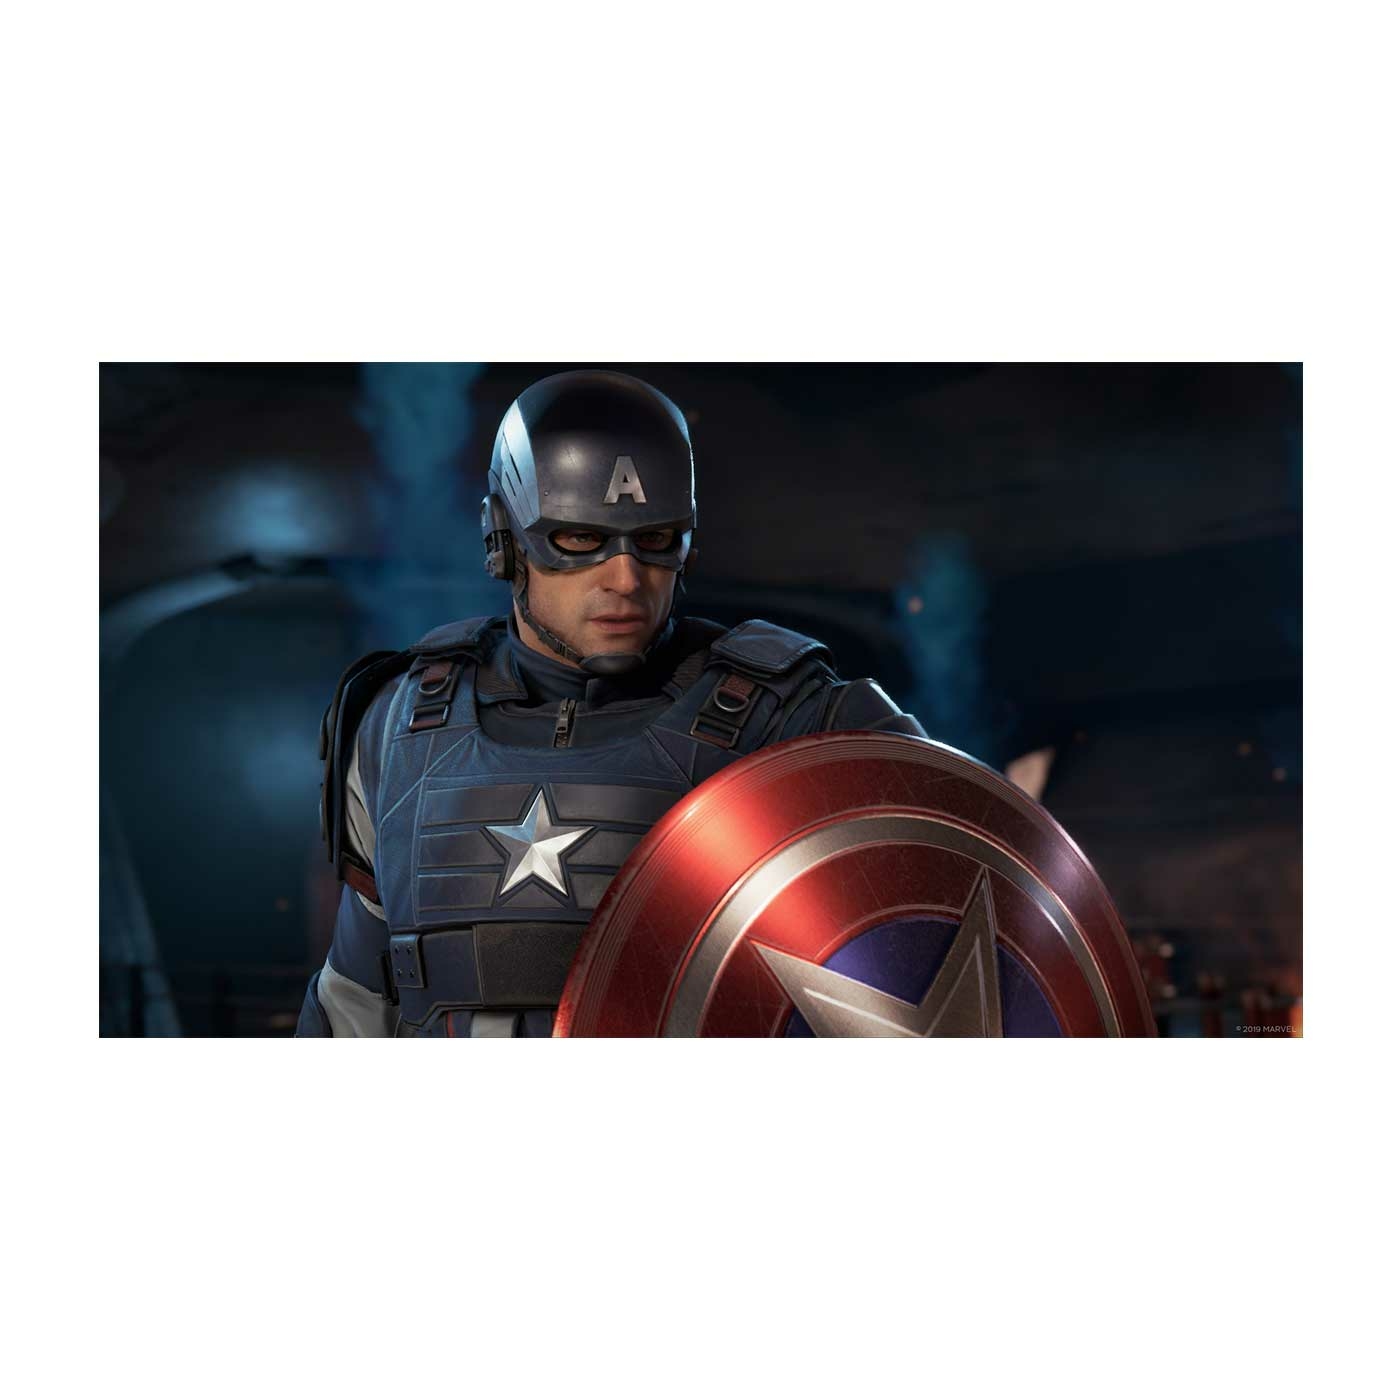 Juego PS4 Avengers CE